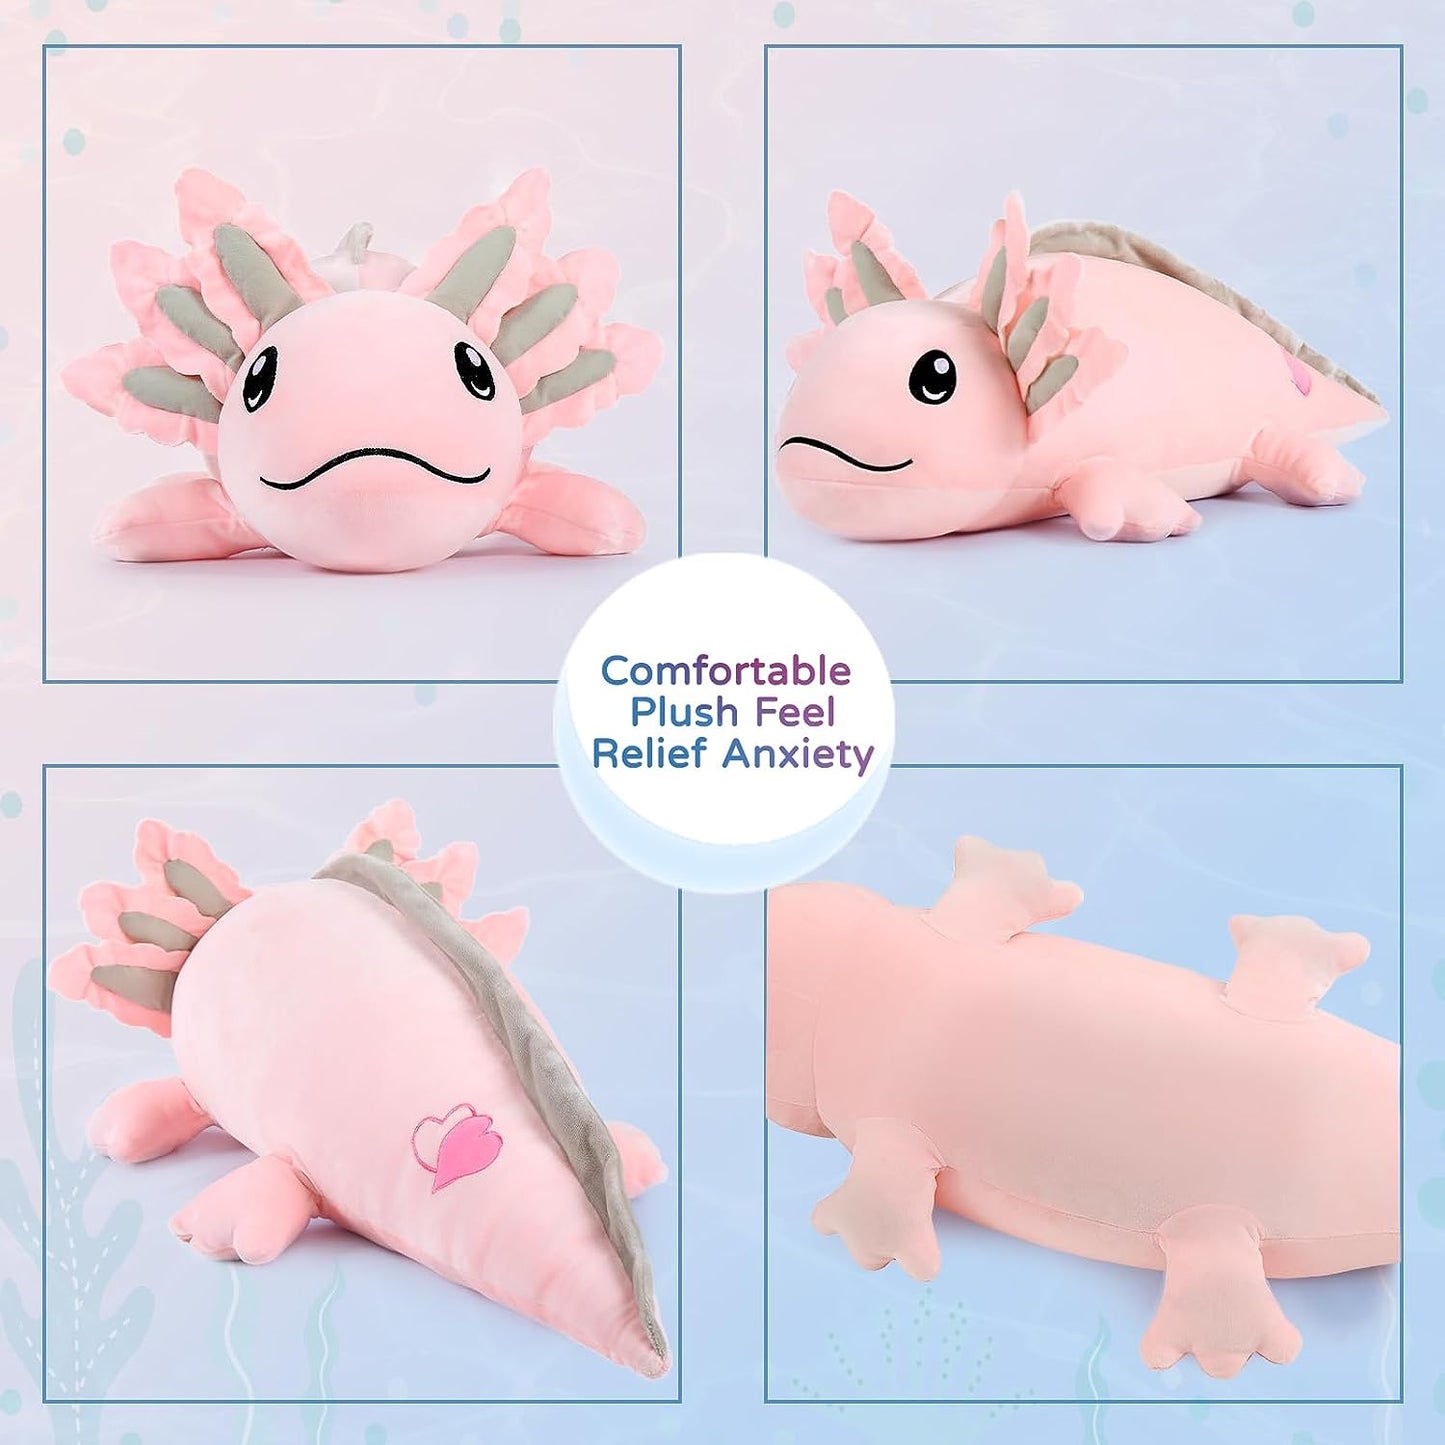 This axolotl plushie isn't the common stuffed animal. What makes it unique is its weight, which has therapeutic benefits. It's a great helper when dealing with anxiety, keeping emotions in check, and even kicking off stress! The secret of its weight? It's all in the stuffing it's filled with. This axolotl plush toy comes filled with tiny weighted beads in its tummy and four limbs. But don't worry, these beads are totally safe for use.